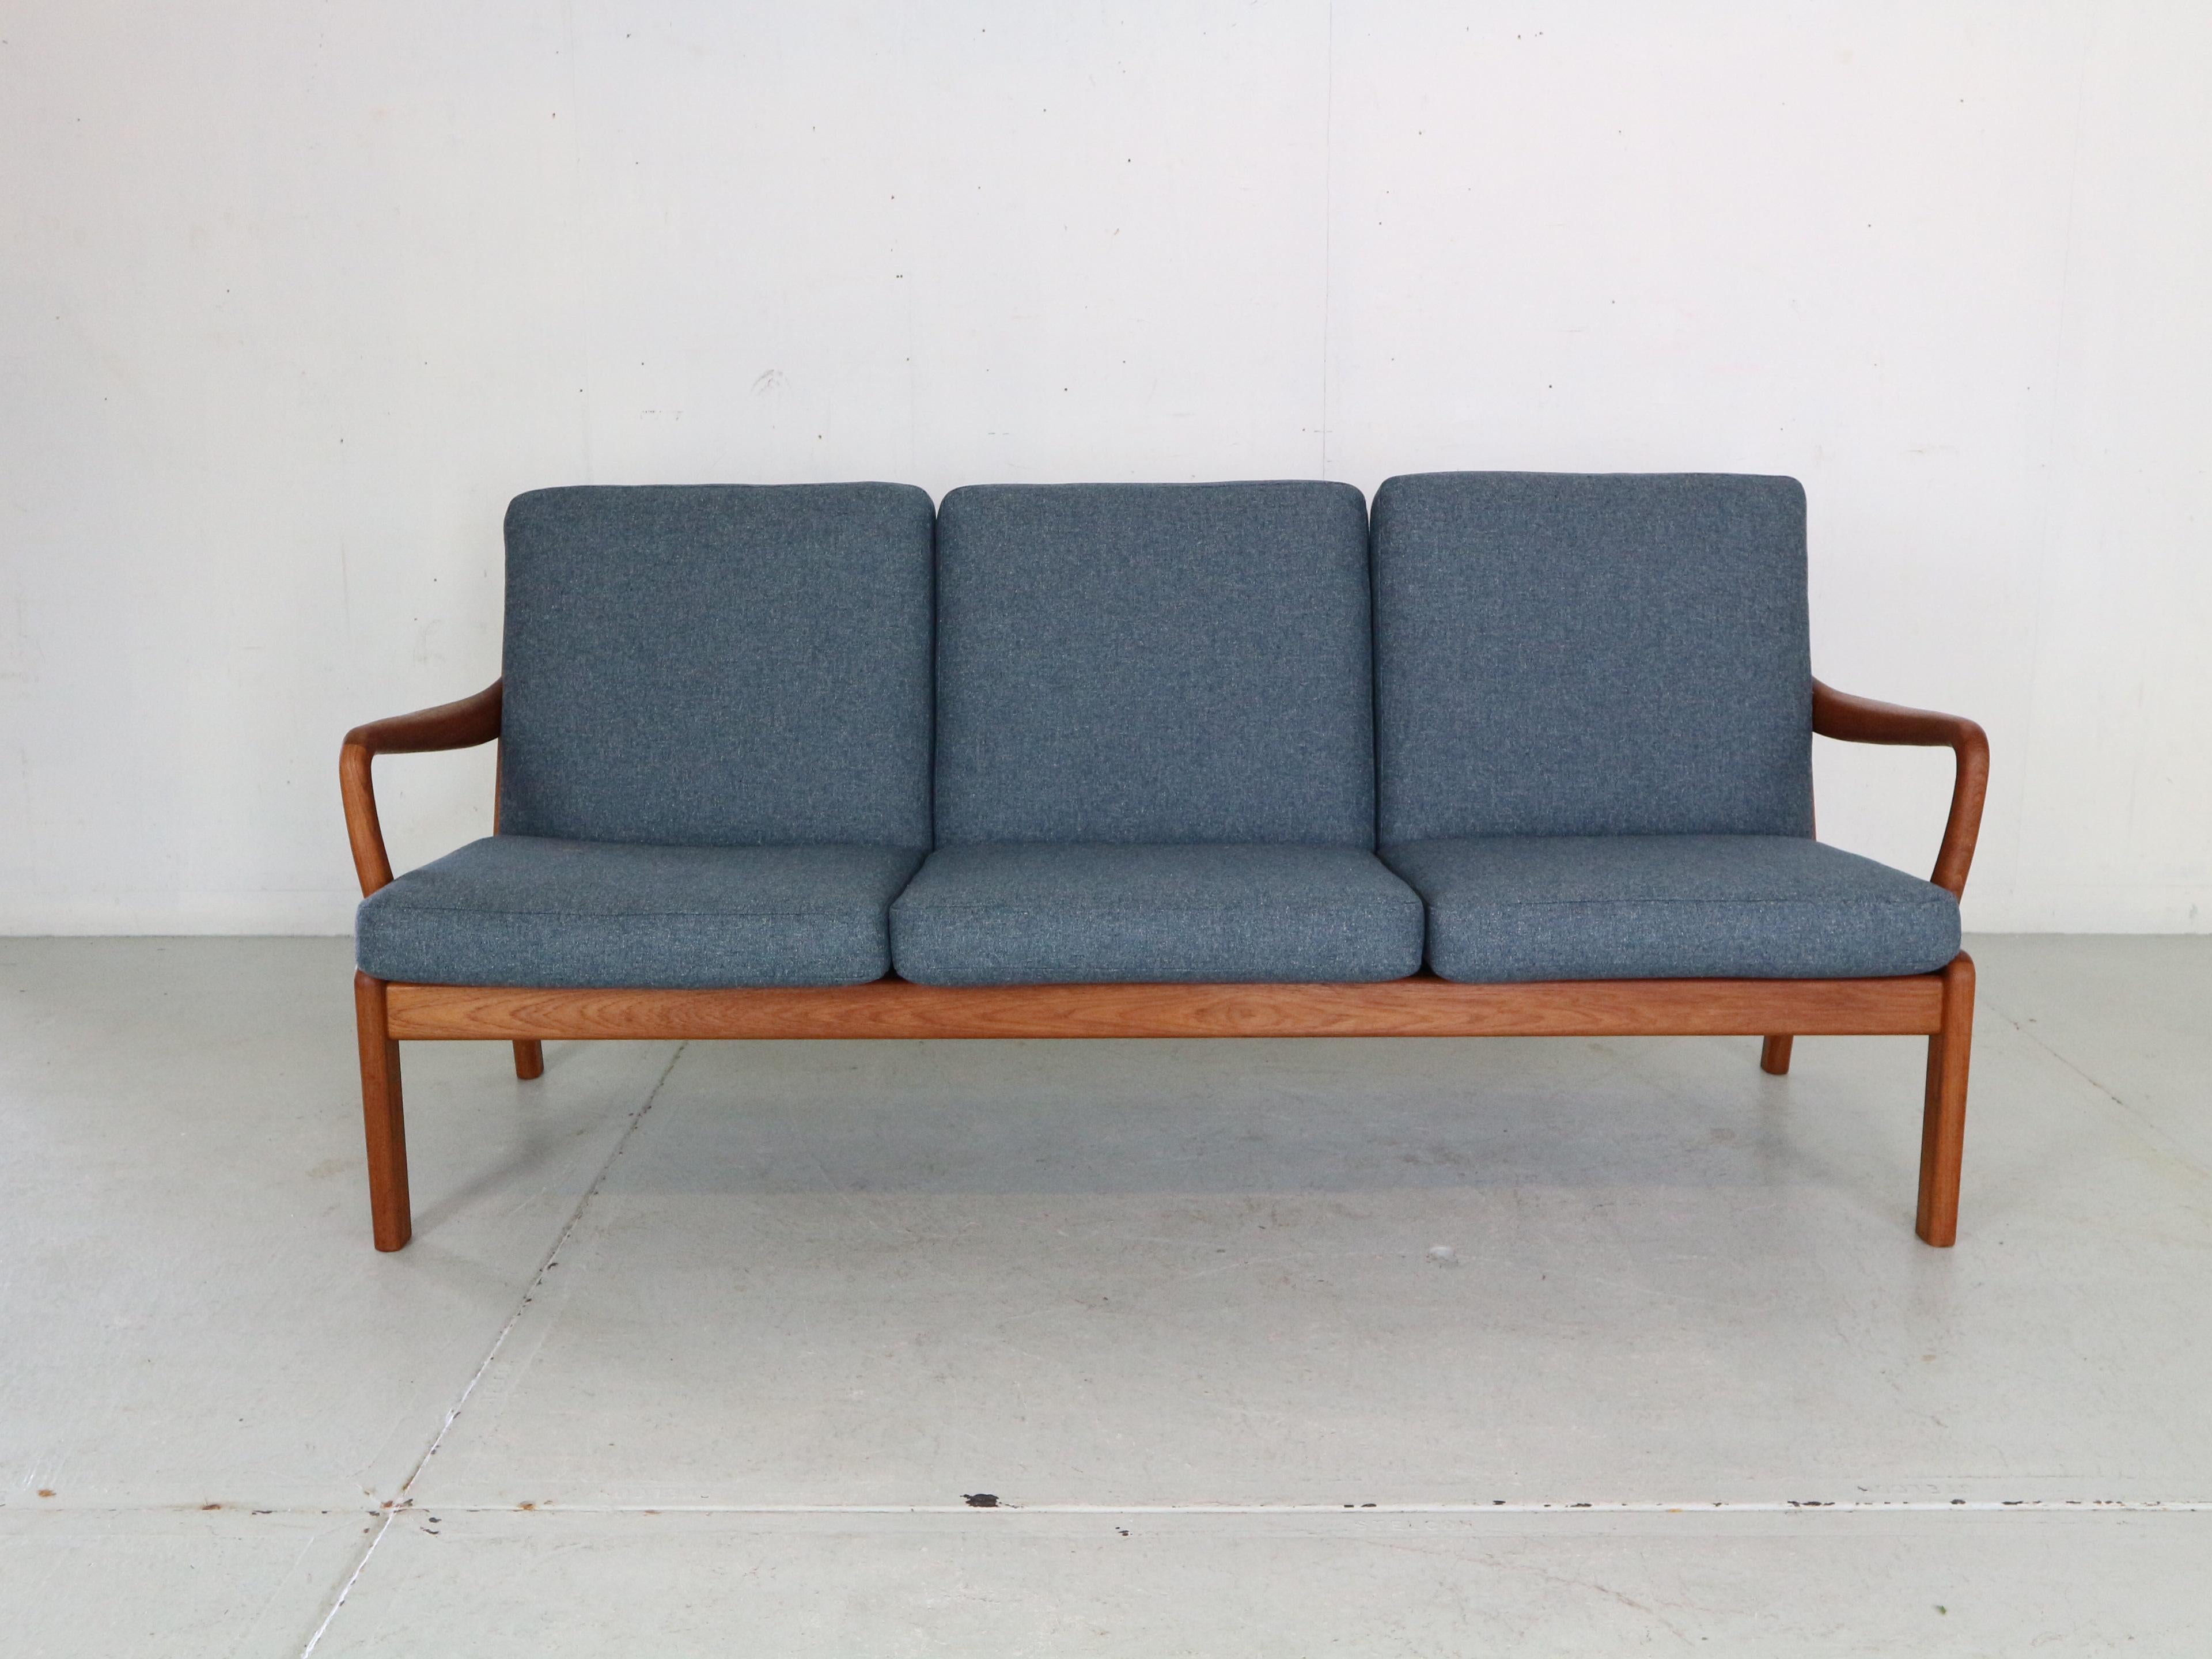 Gorgeous Danish Modern three-seater sofa designed and manufactured by L. Olsen & Son. 
Featuring the typical organic 1960s Danish design, solid teak frame, high quality newly reupholstered in blue colour wool fabric.
Excellent seating comfort and